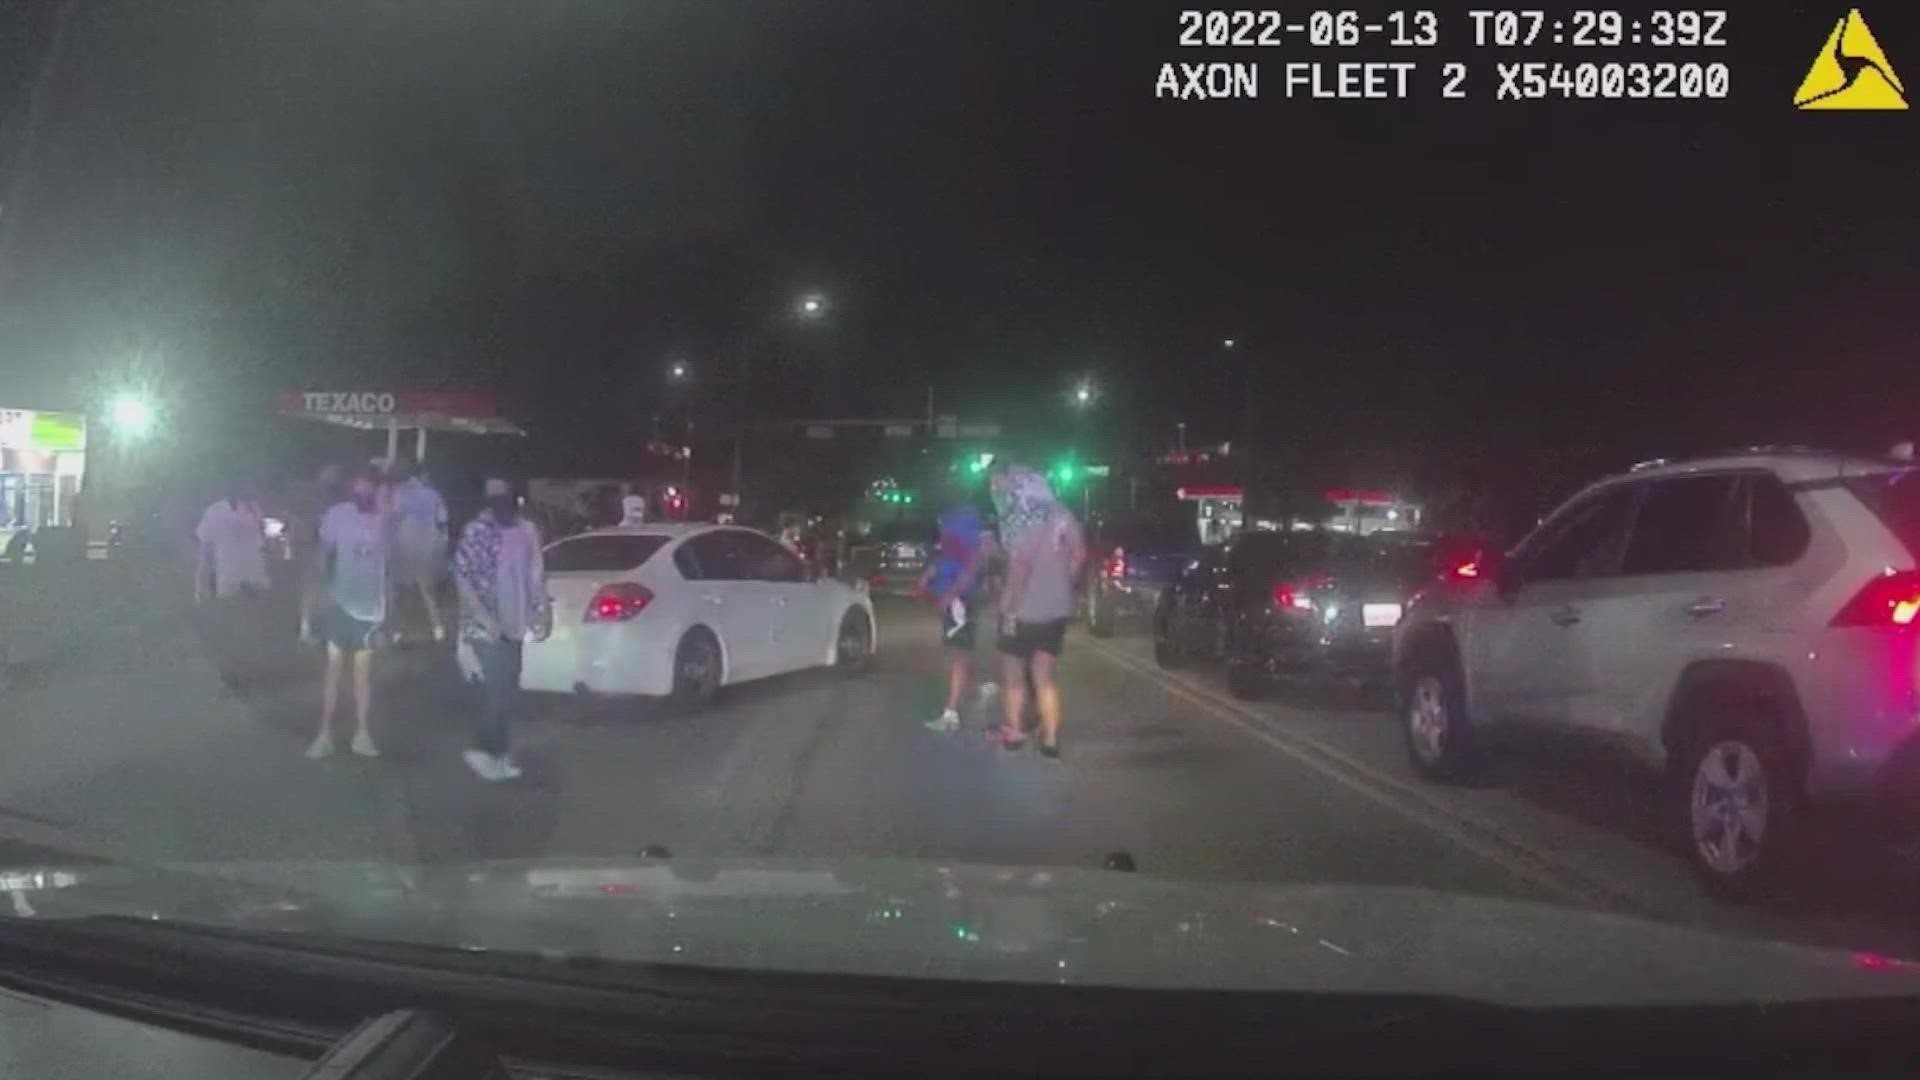 At least one was arrested at the event early Monday. Investigators in Euless are hoping to file more charges, but need help identifying participants seen in videos.